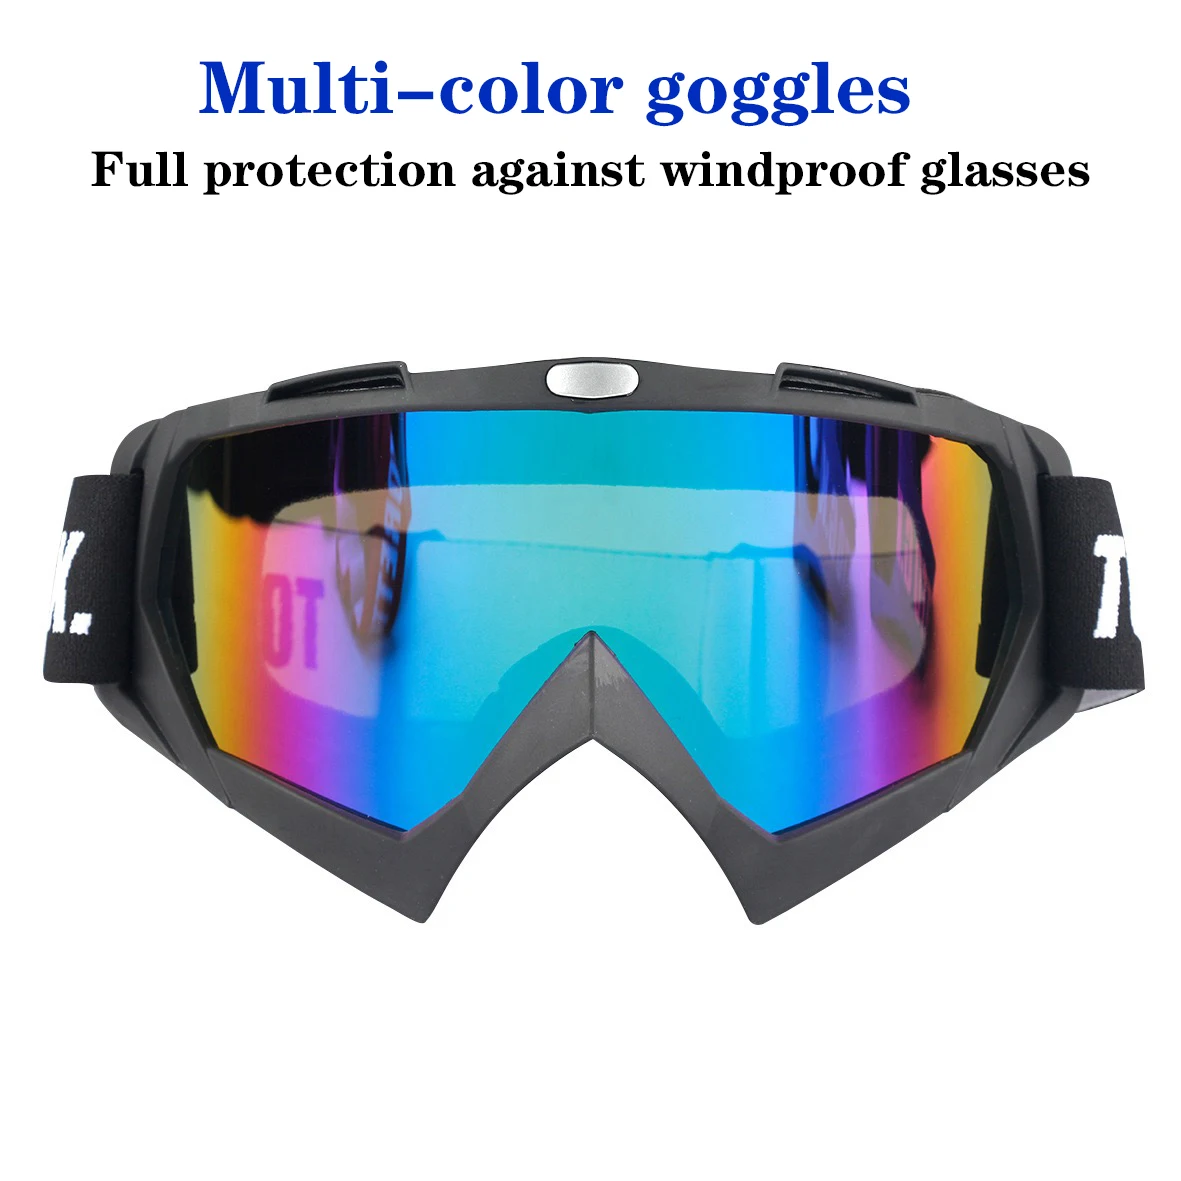 

Outdoor Sports, Ski Goggles, Motocross Cycling Goggles, Colorful Lenses, Windproof And Sandproof